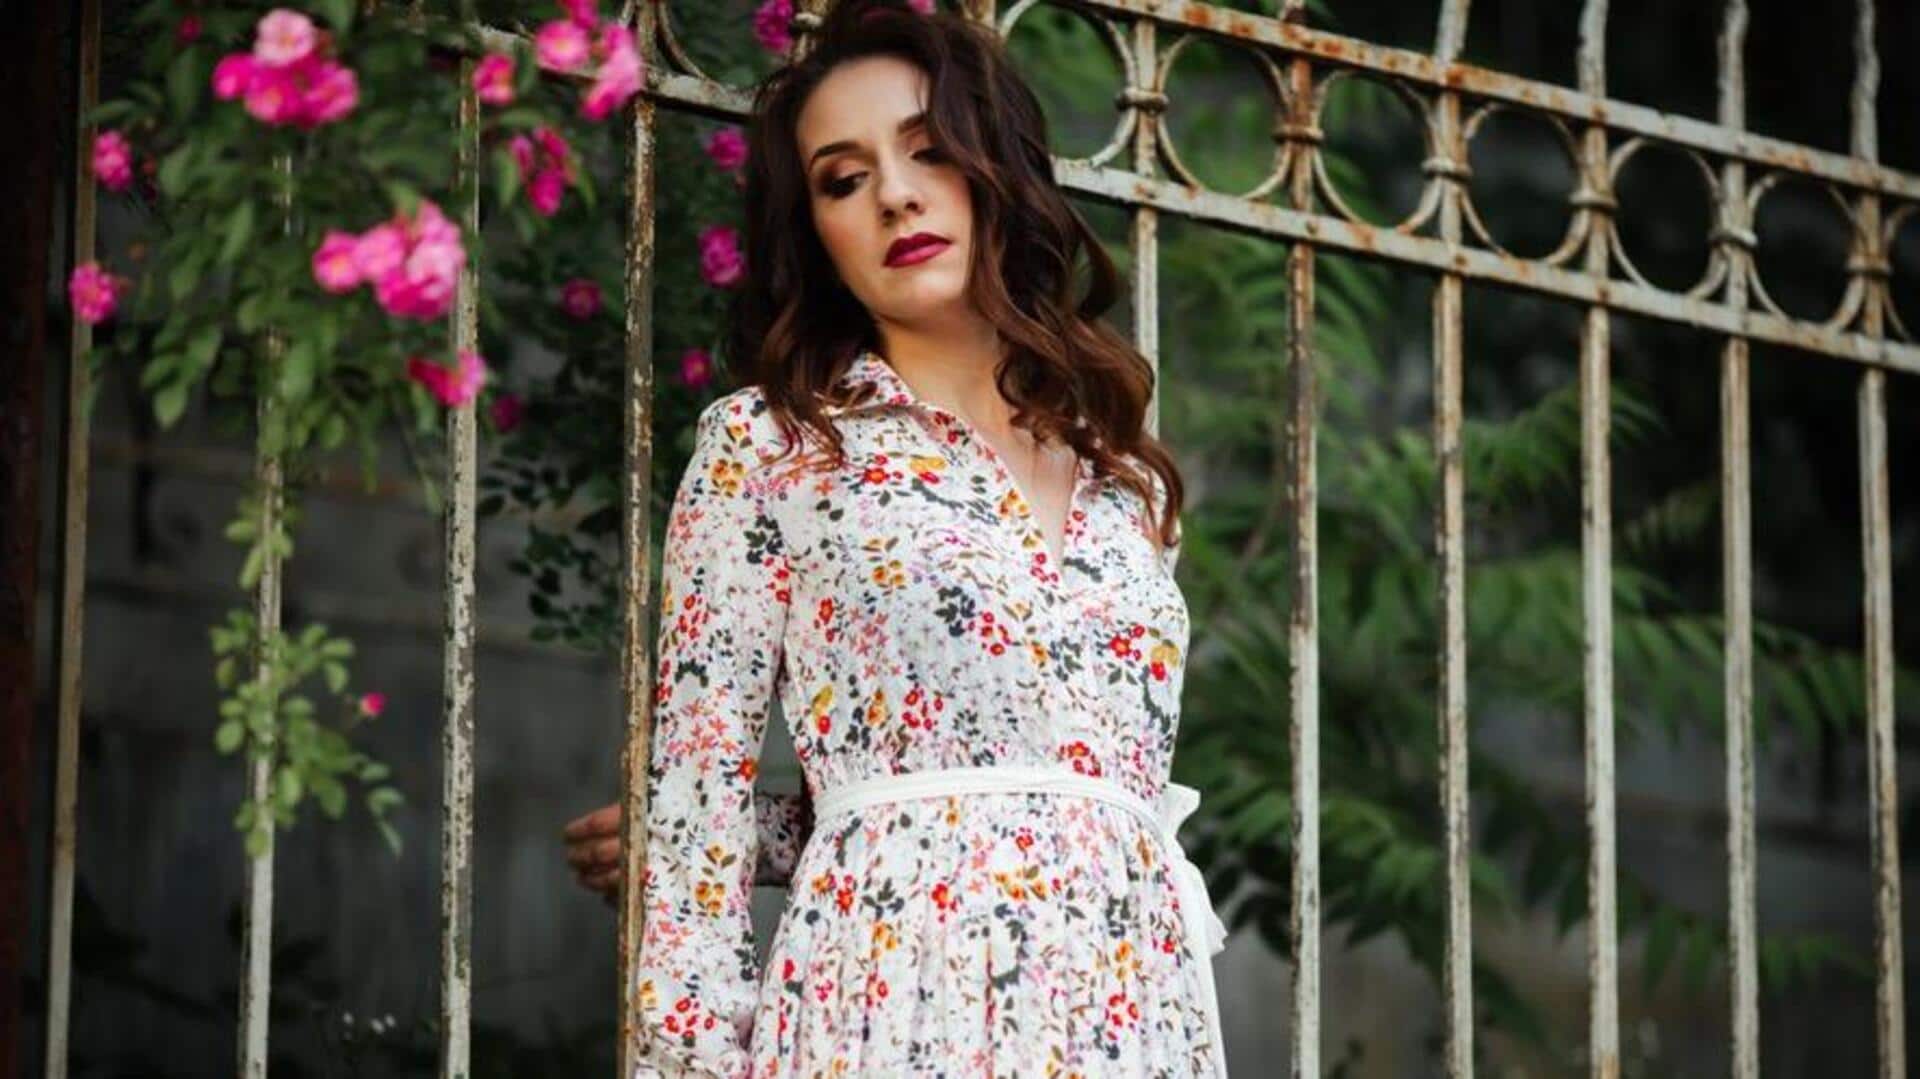 Blossom in style with these spring floral dresses